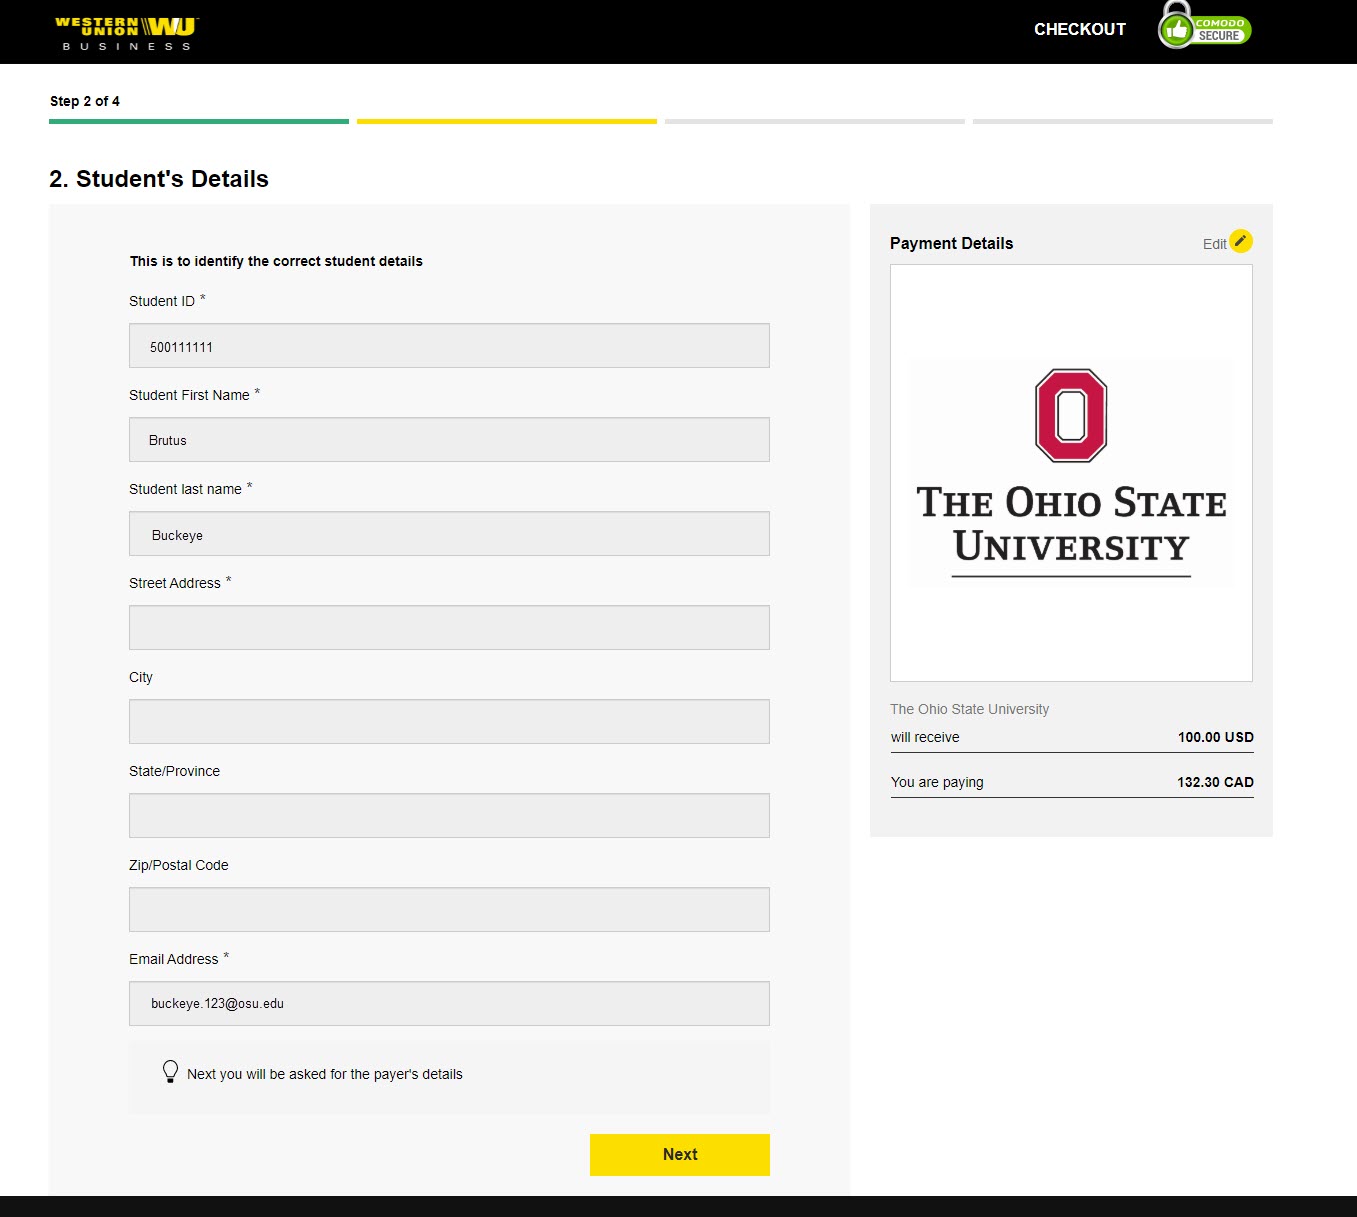 The Ohio State University Western Union payment portal, Step 2 of 4 of the Get a quote process - Student Details page. This page is to identify the correct student details. Fields include: Student ID, Student First Name, Student last name, Street Address, City, State/Province, Zip/Postal Code and E-mail Address. The Next button appears at the bottom of the page. 